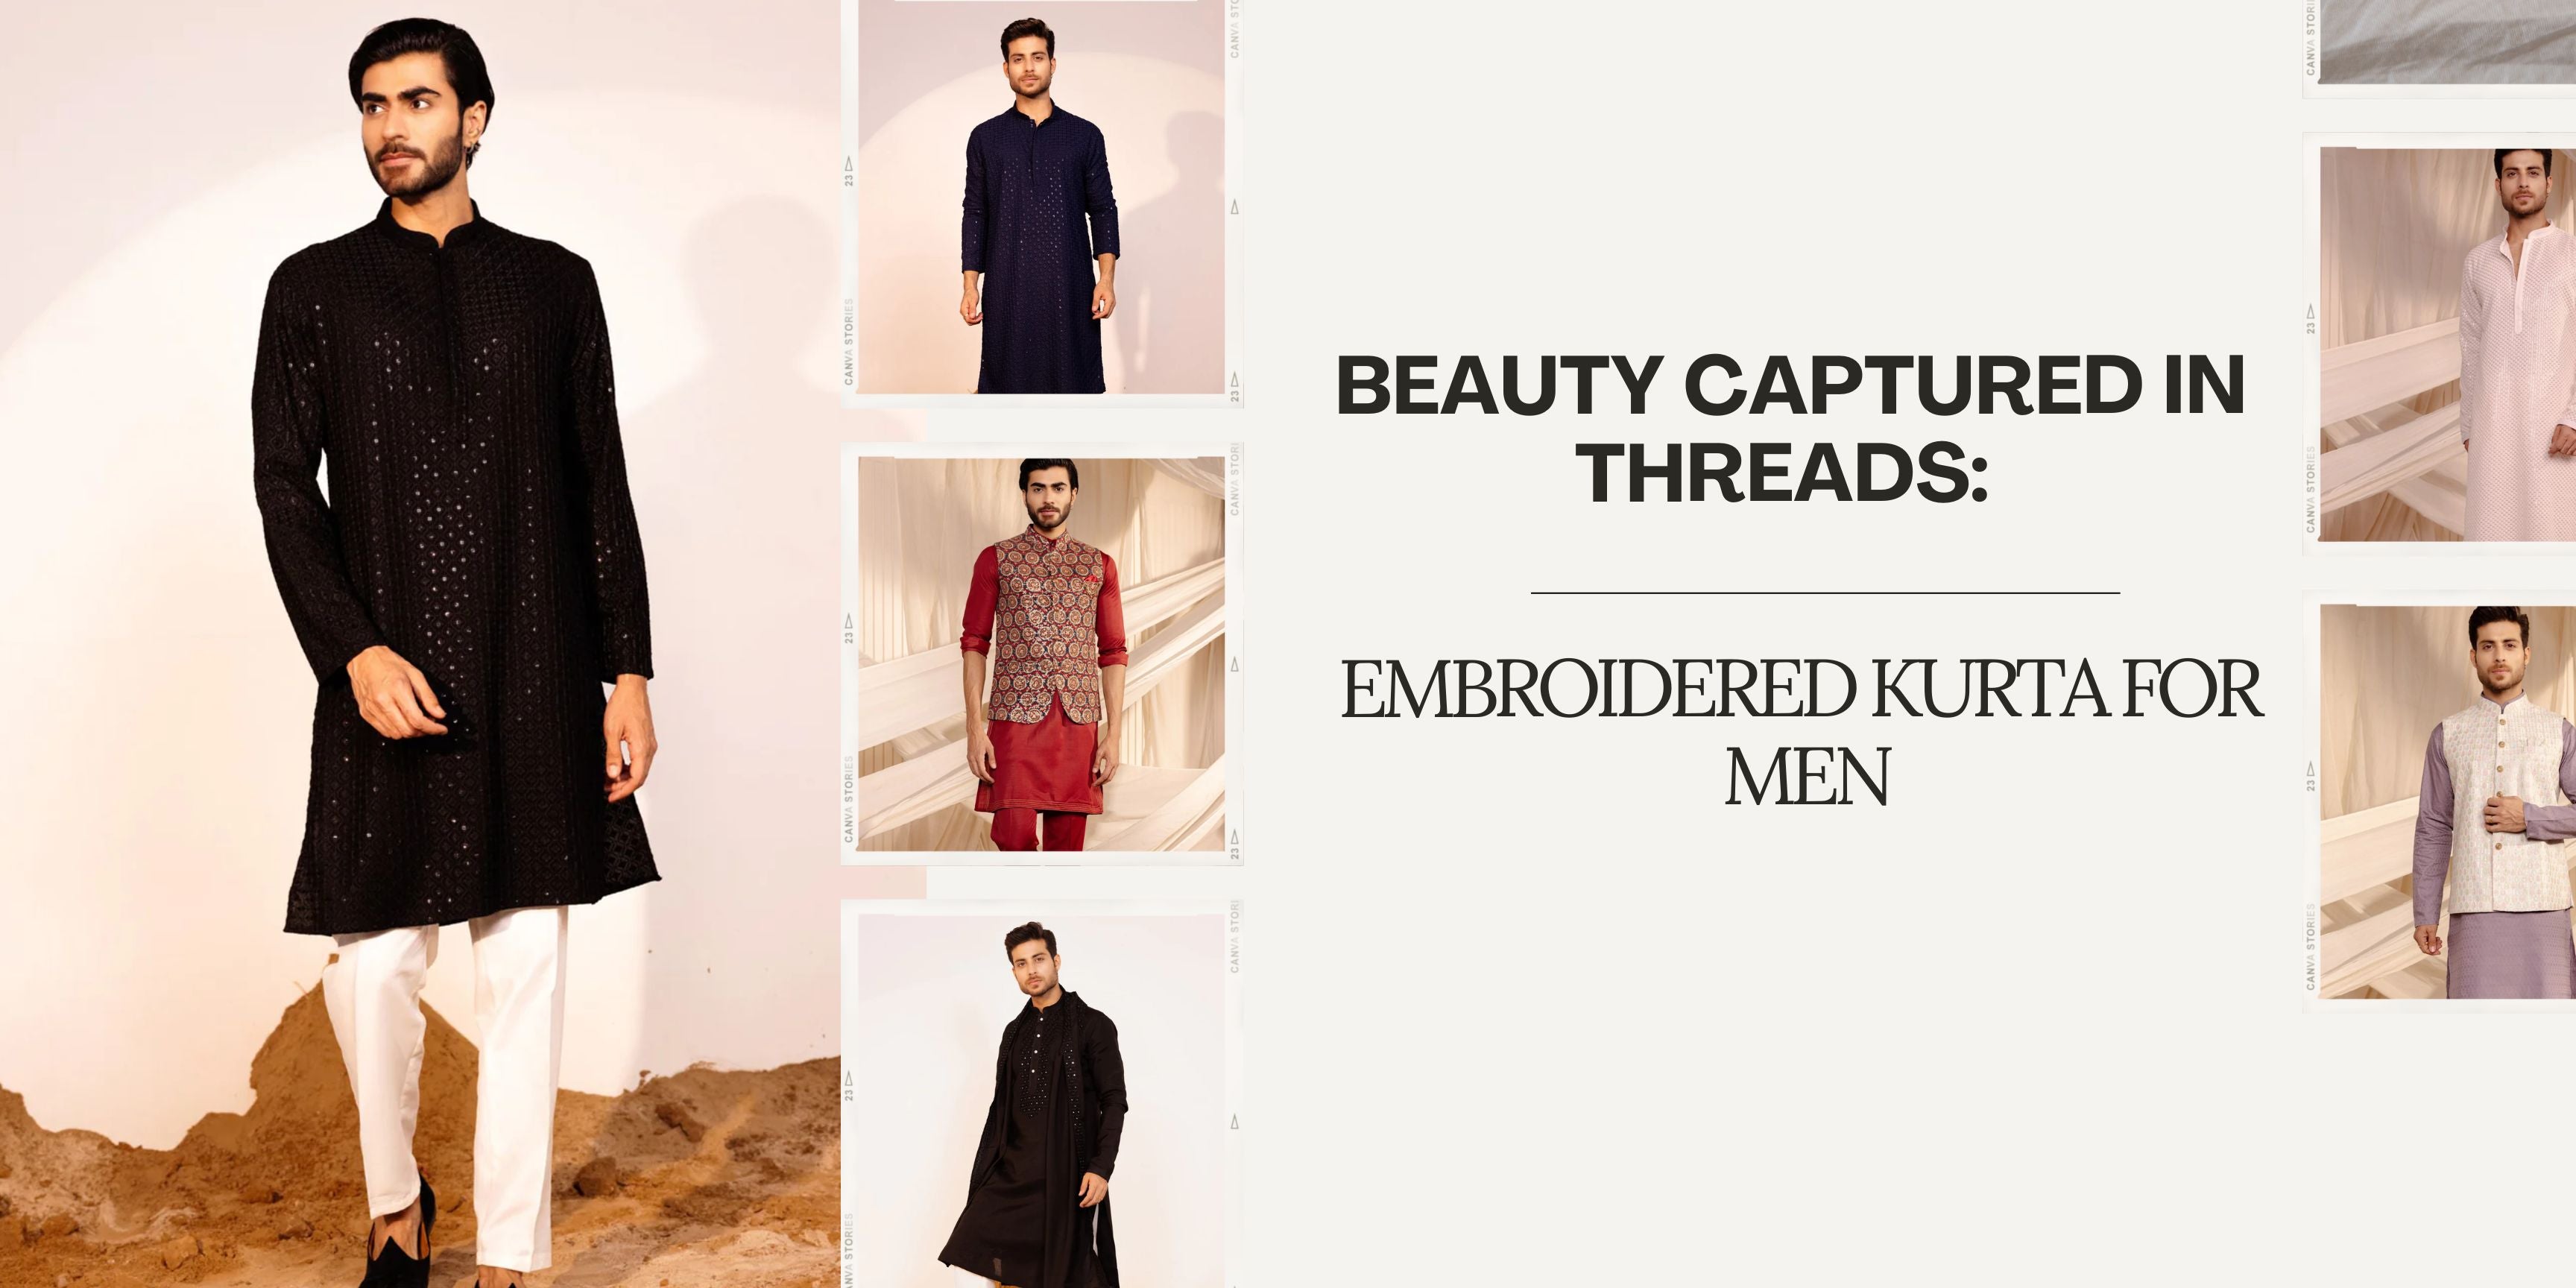 Beauty Captured in Threads: Embroidered Kurta for Men